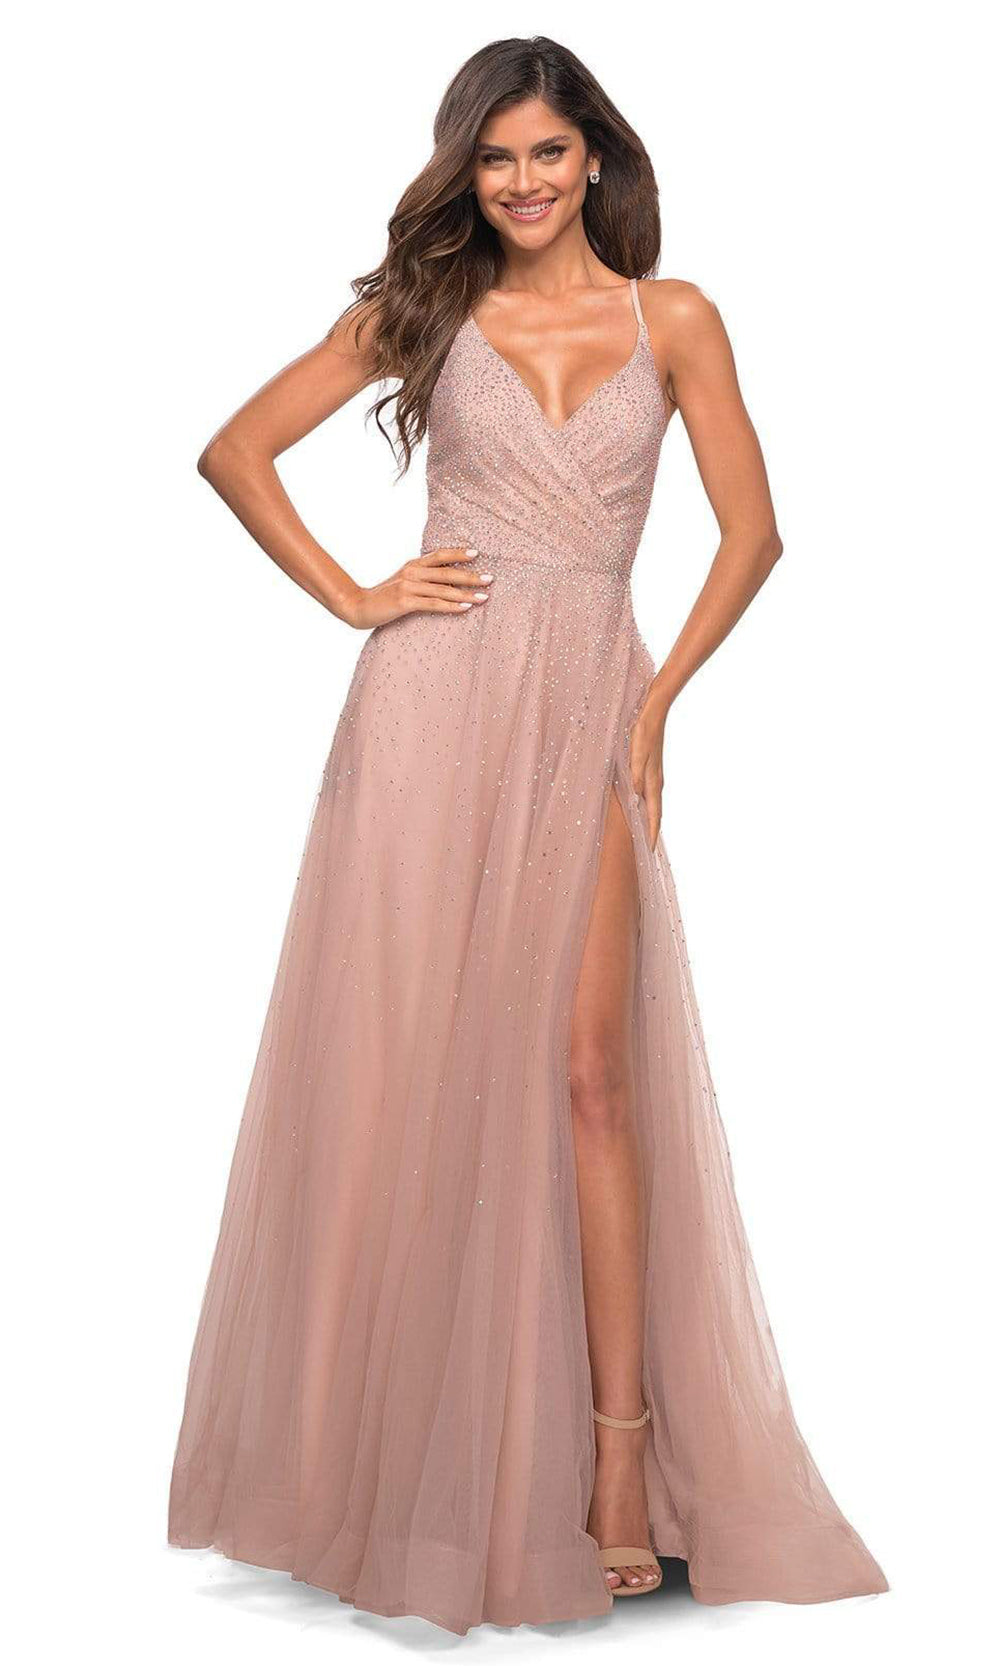 La Femme - 29920 A-Line Beaded Allover Long Dress In Pink and Neutral